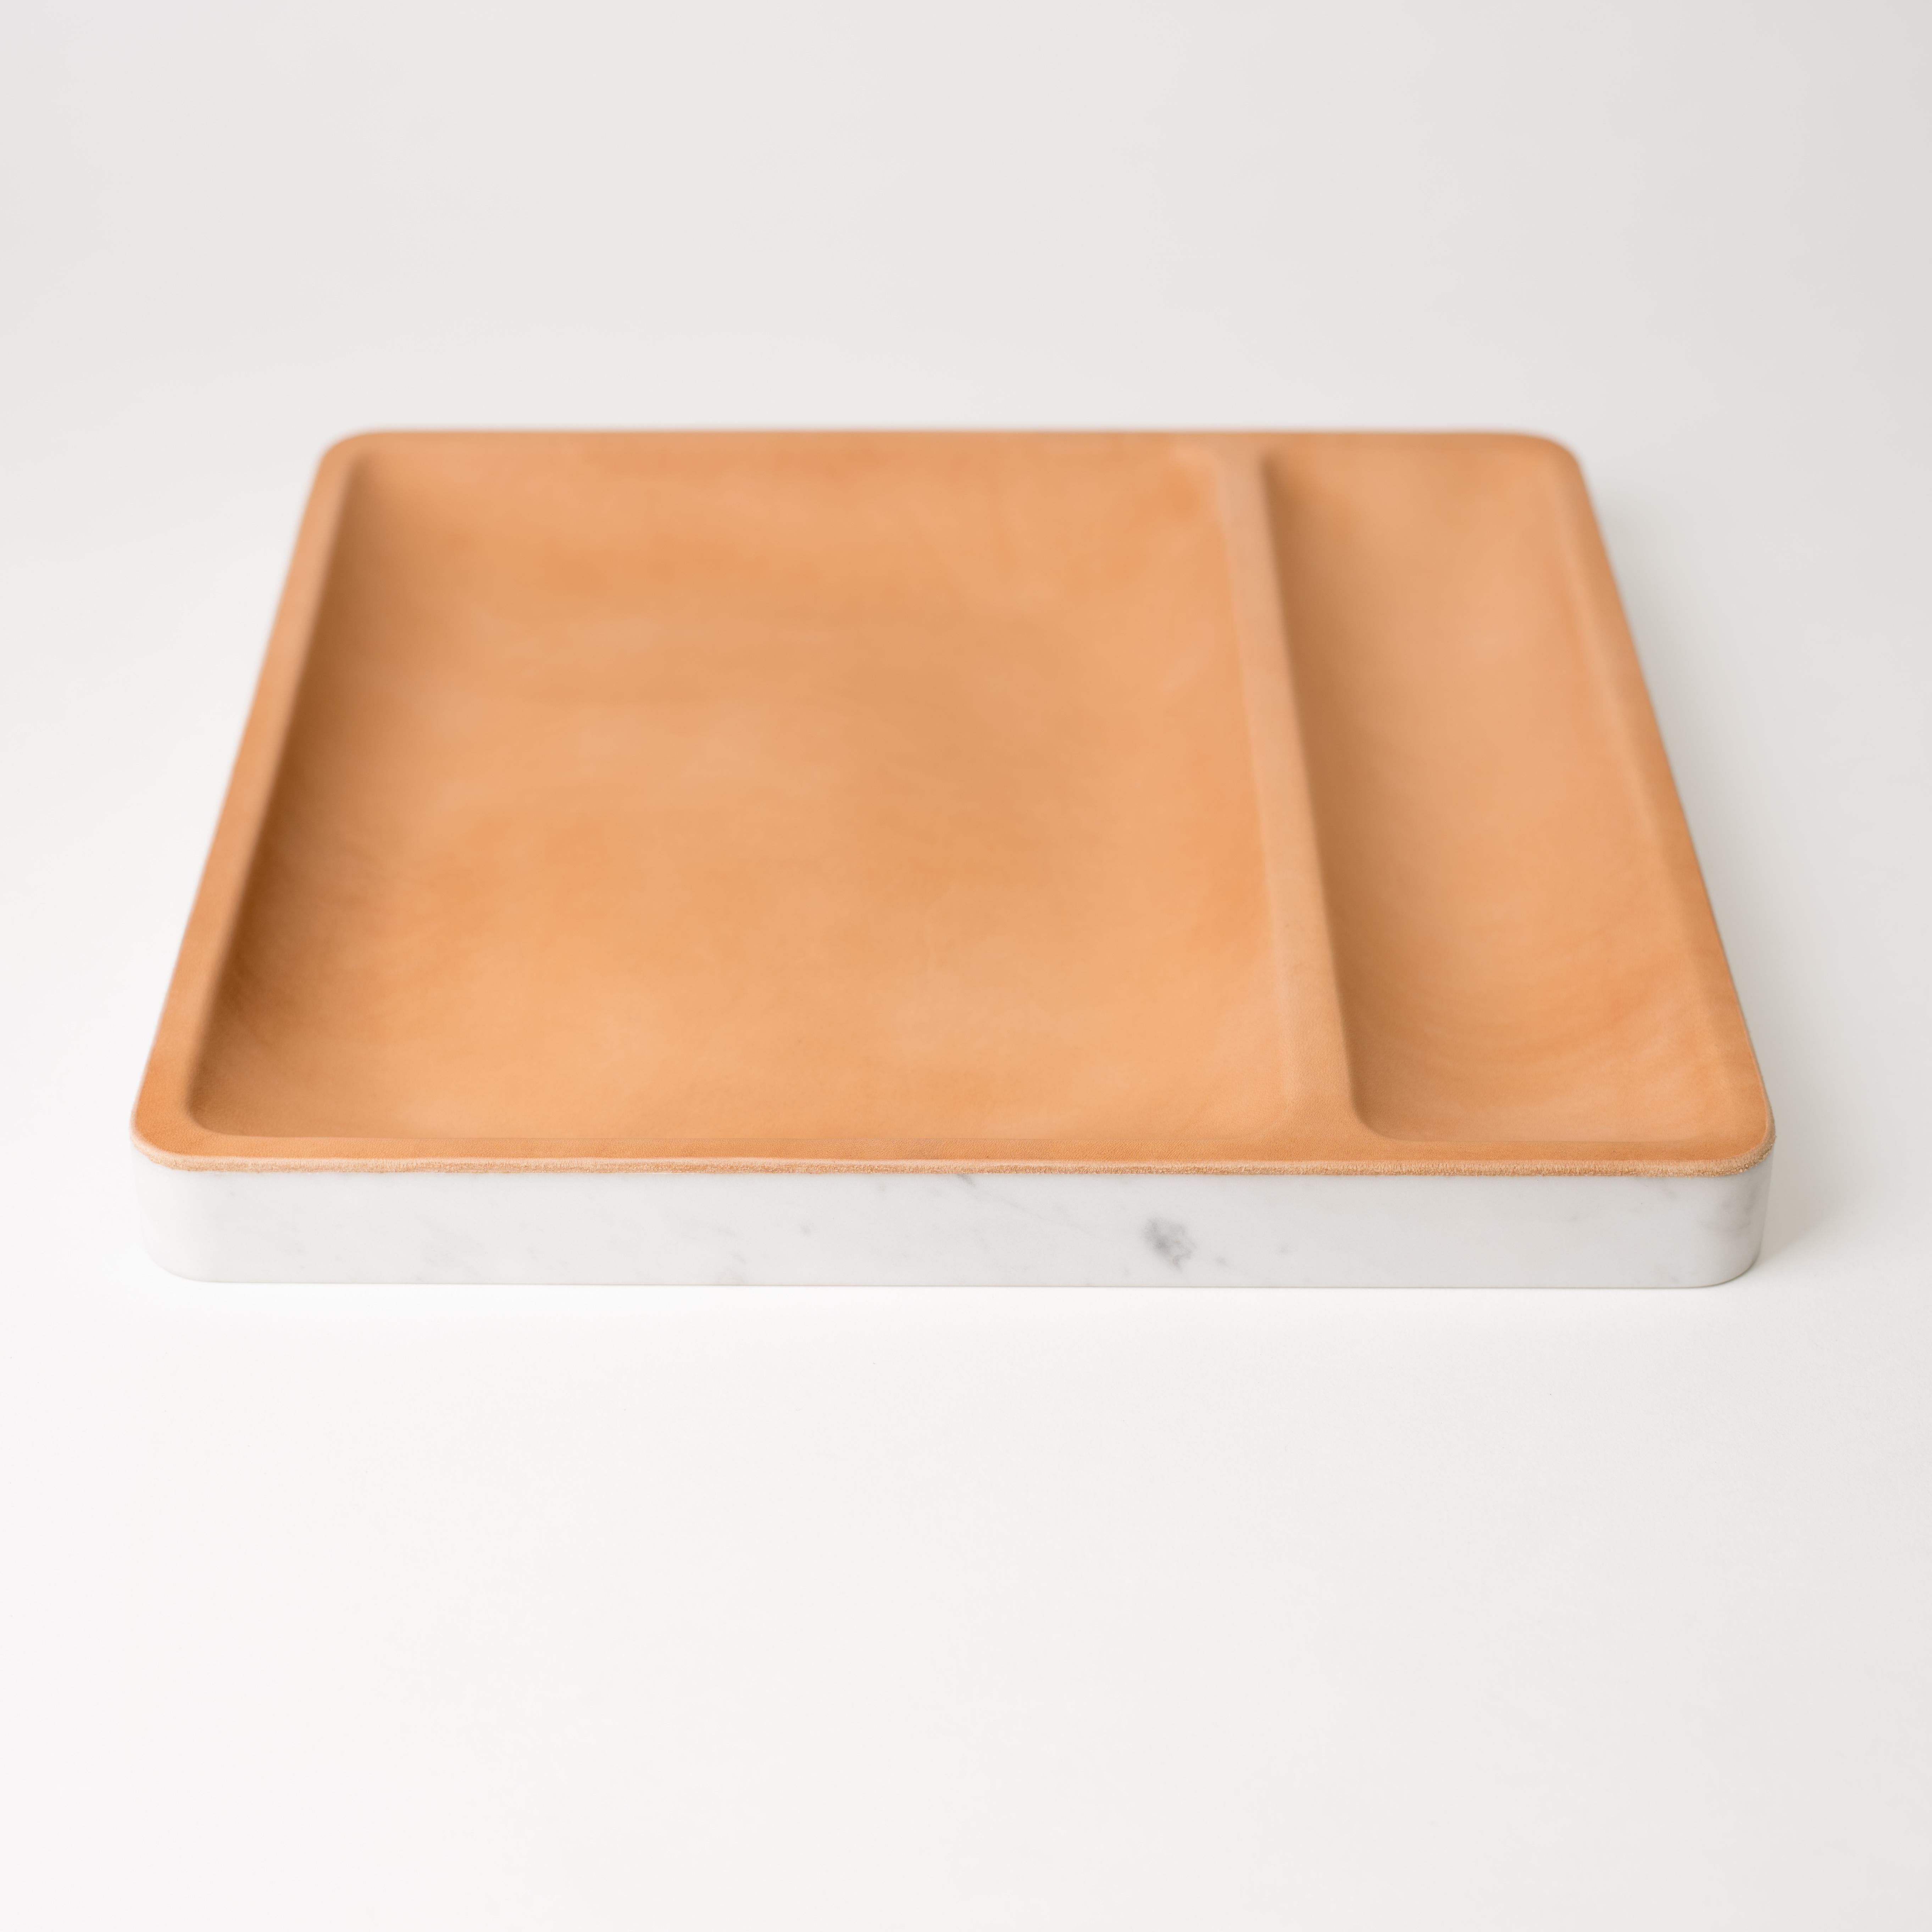 Modern combination of luxurious materials to contain the precious items you covet. Elevate your daily rituals with a place to hold and organize the items you carry every day. The Carrara Marble base is waterjet cutout of single piece. To maximize